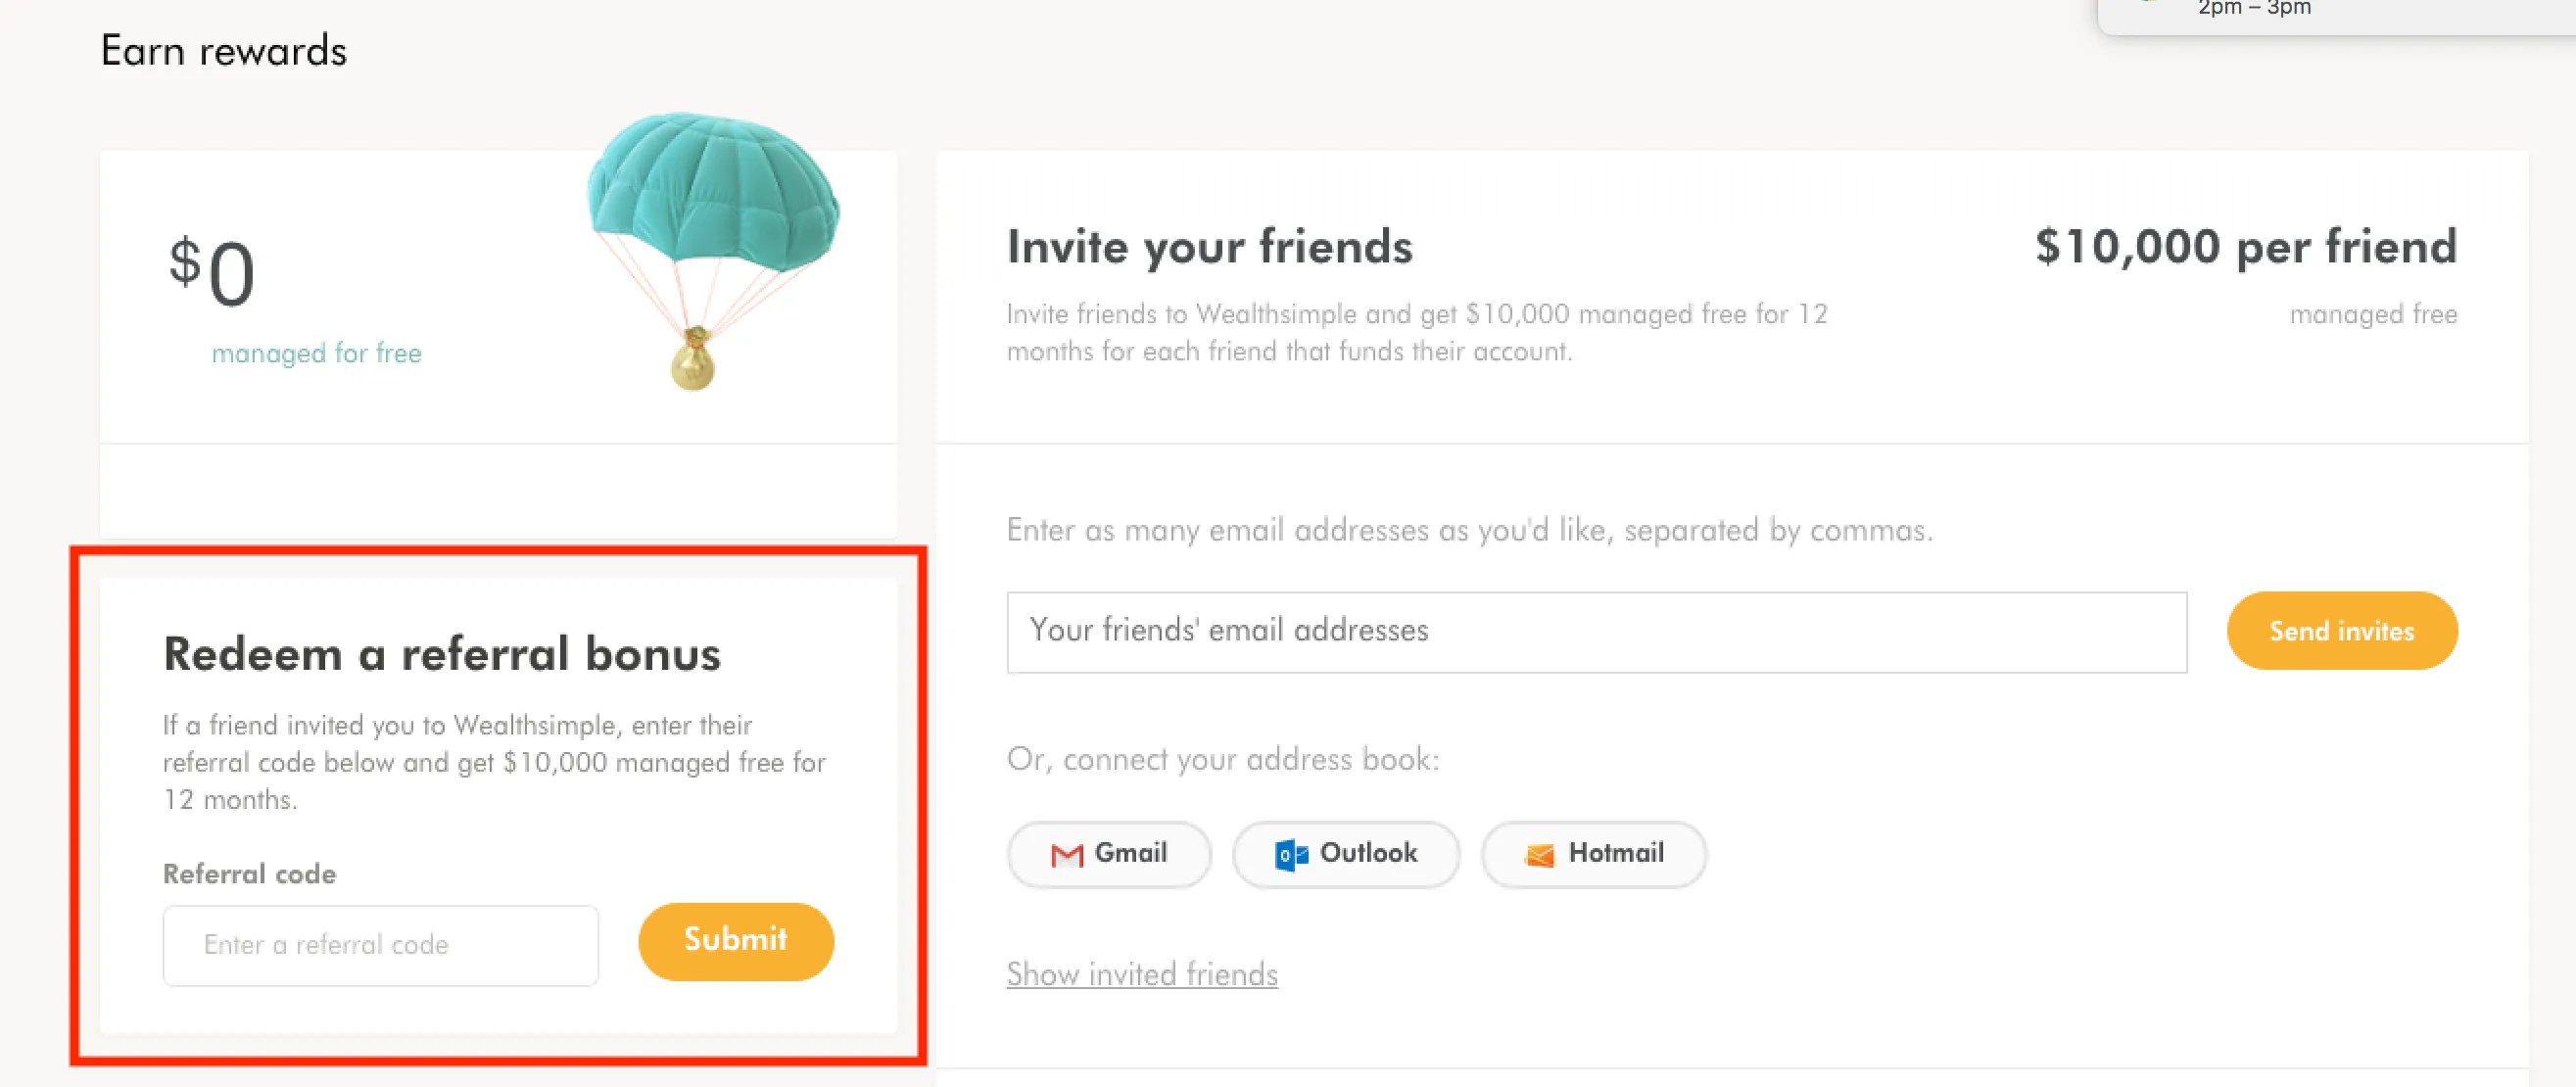 A screenshot of a Wealthsimple application page. The page shows a hot air balloon with money attached to it, indicating an investment opportunity. The page also highlights an option to redeem a referral bonus, with a red box around it. On the right side of the page, there is an option to invite friends with a referral code, which offers $10,000 managed for free for 12 months. The page also provides instructions on how to invite friends or connect your address book via Gmail, Outlook, or Hotmail. There is a hyperlink available to show invited friends.